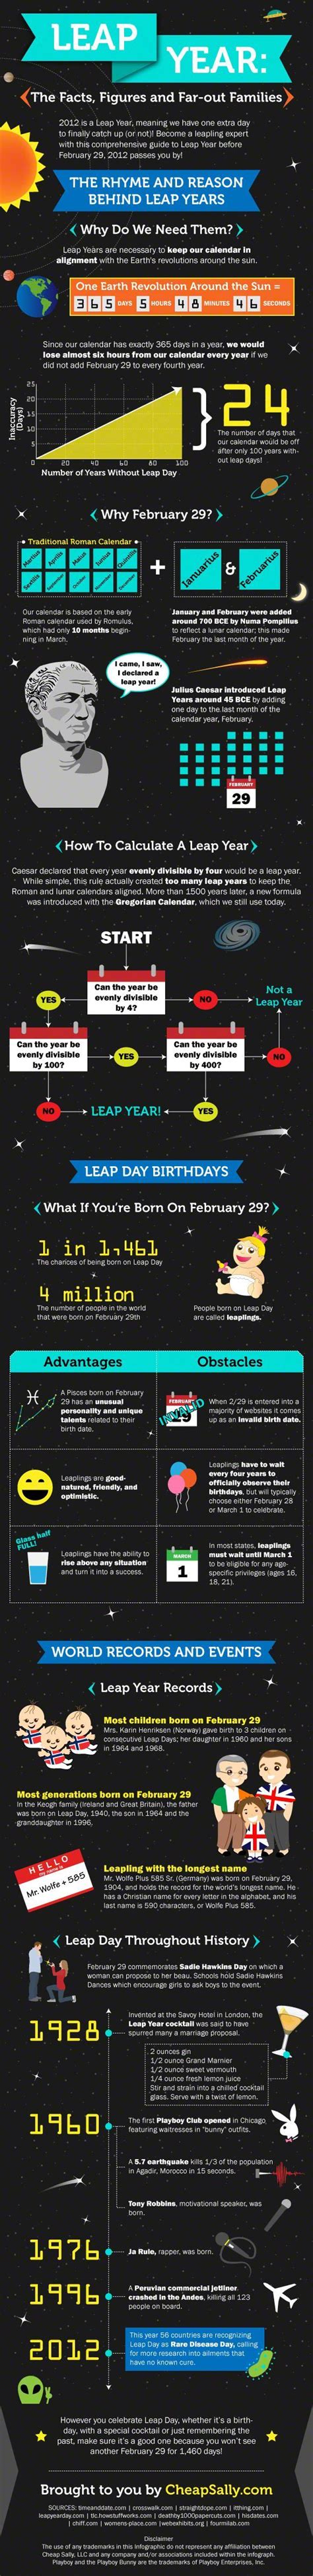 The Weird Facts Behind Leap Year Infographic Leap Year Fun Facts